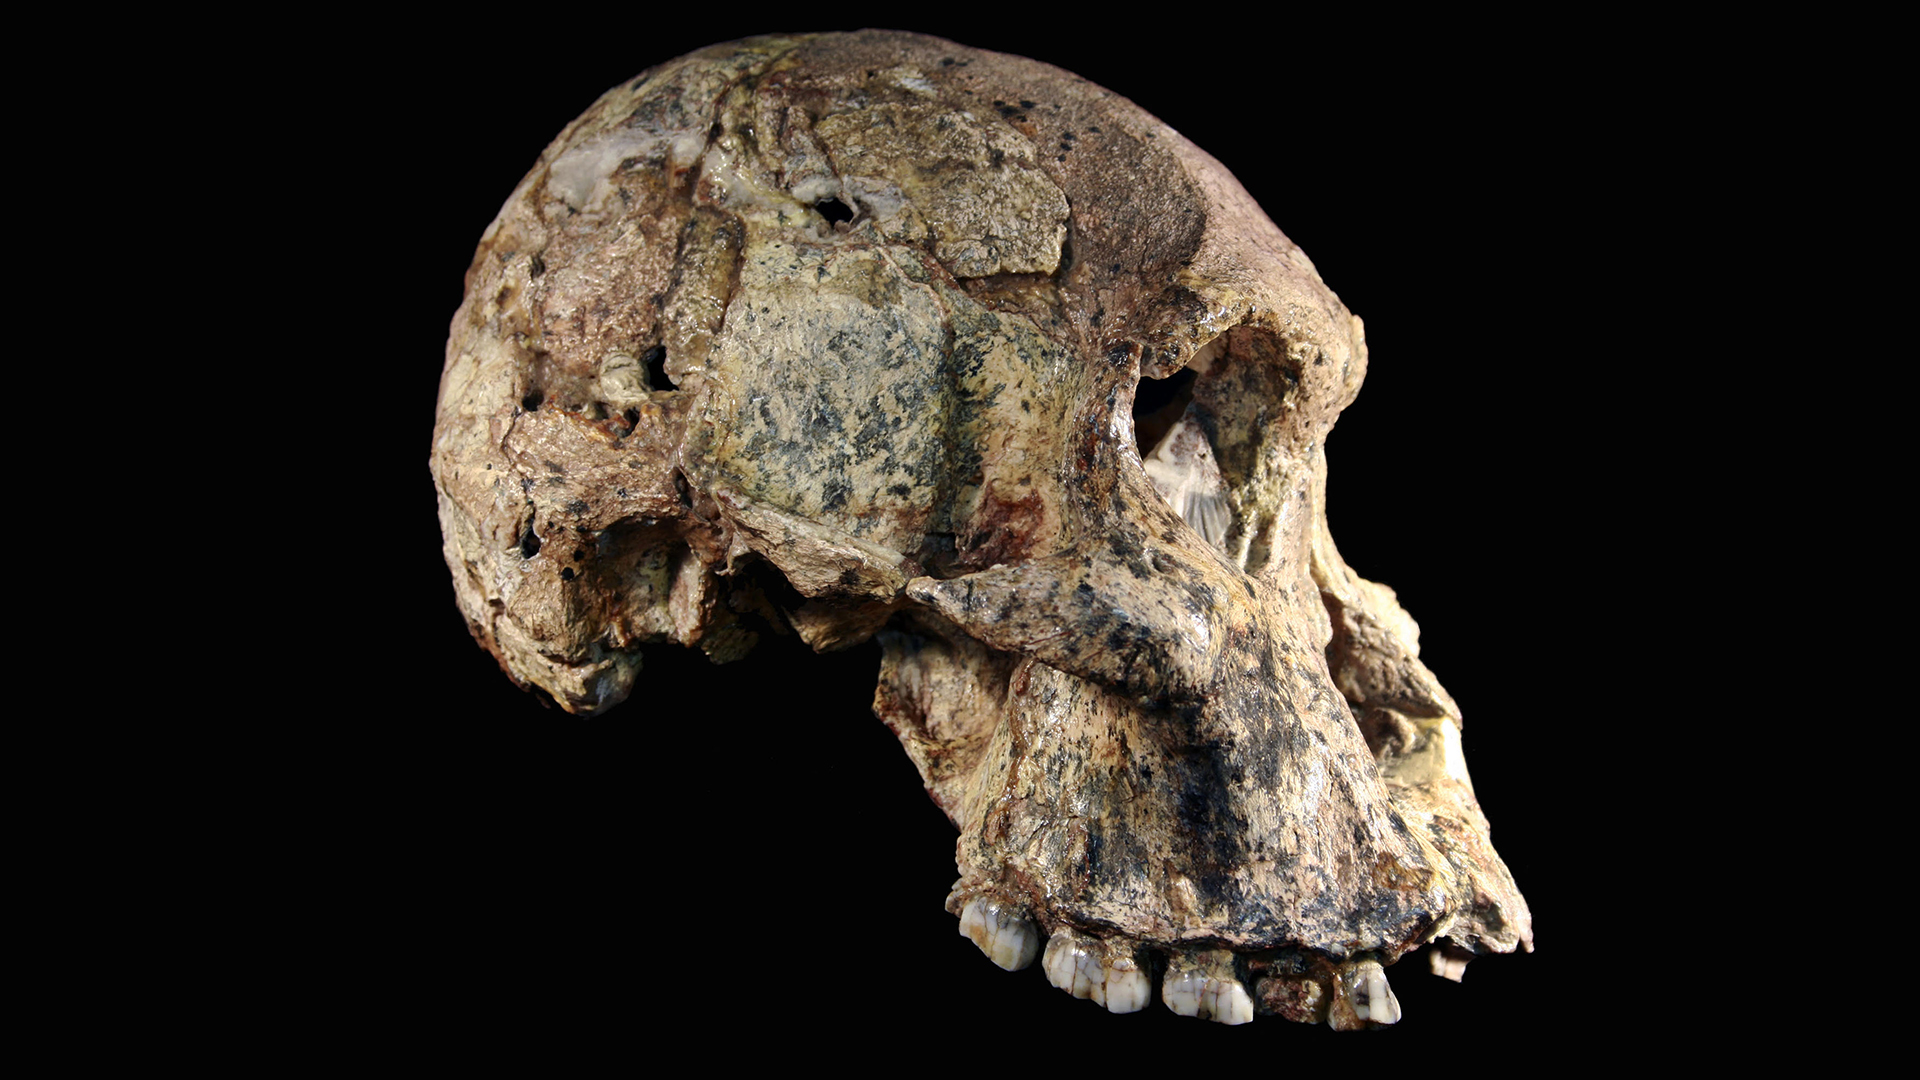 Female Australopithecus Sts 71, discovered in 1947 from Member 4 at Sterkfontein, South Africa and newly dated at 3.4–3.6 million years old.